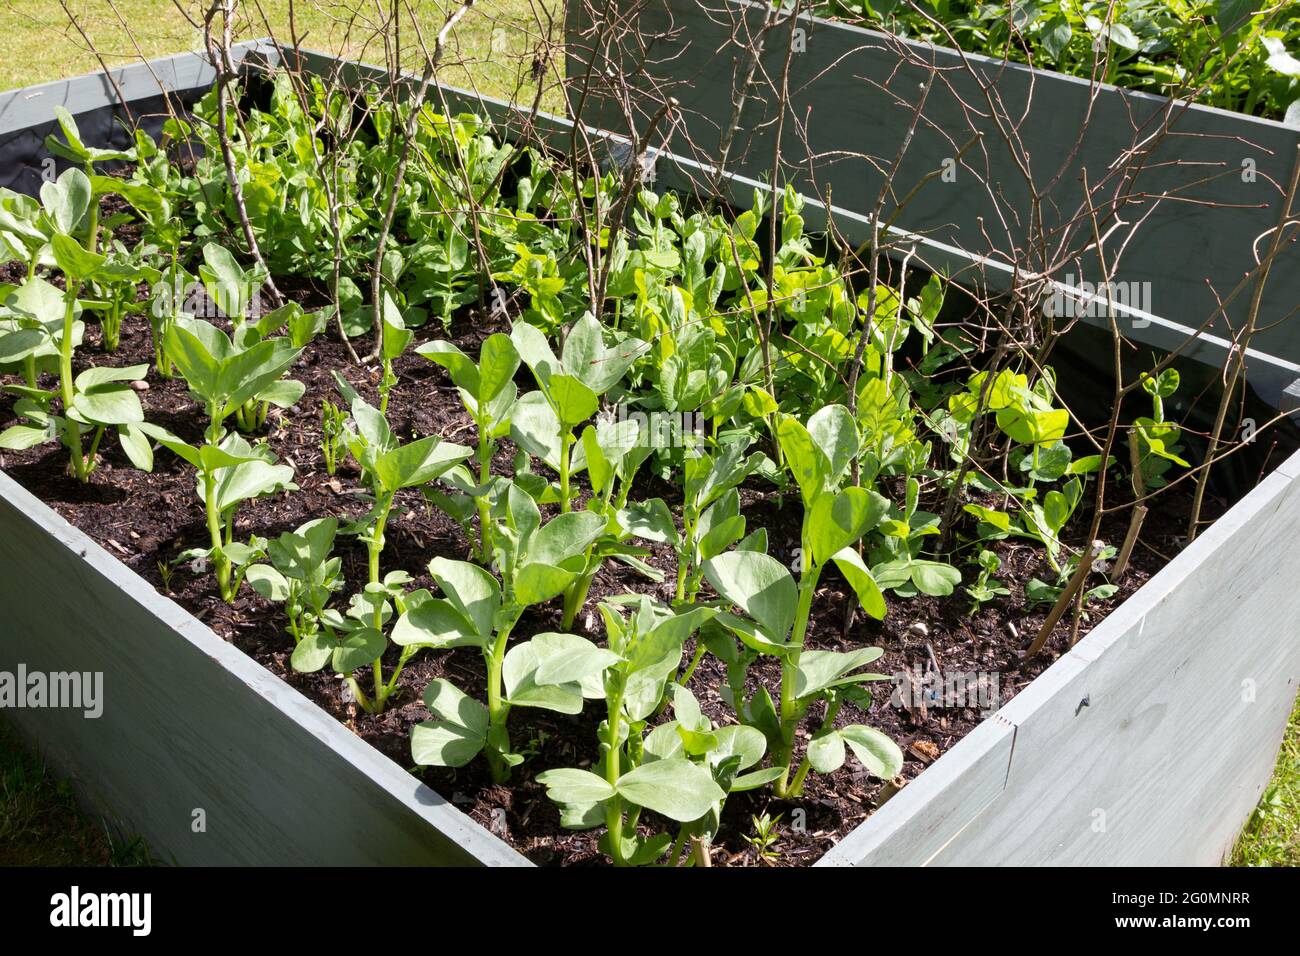 Young broad beans and peas growing together in a raise bed. Stock Photo